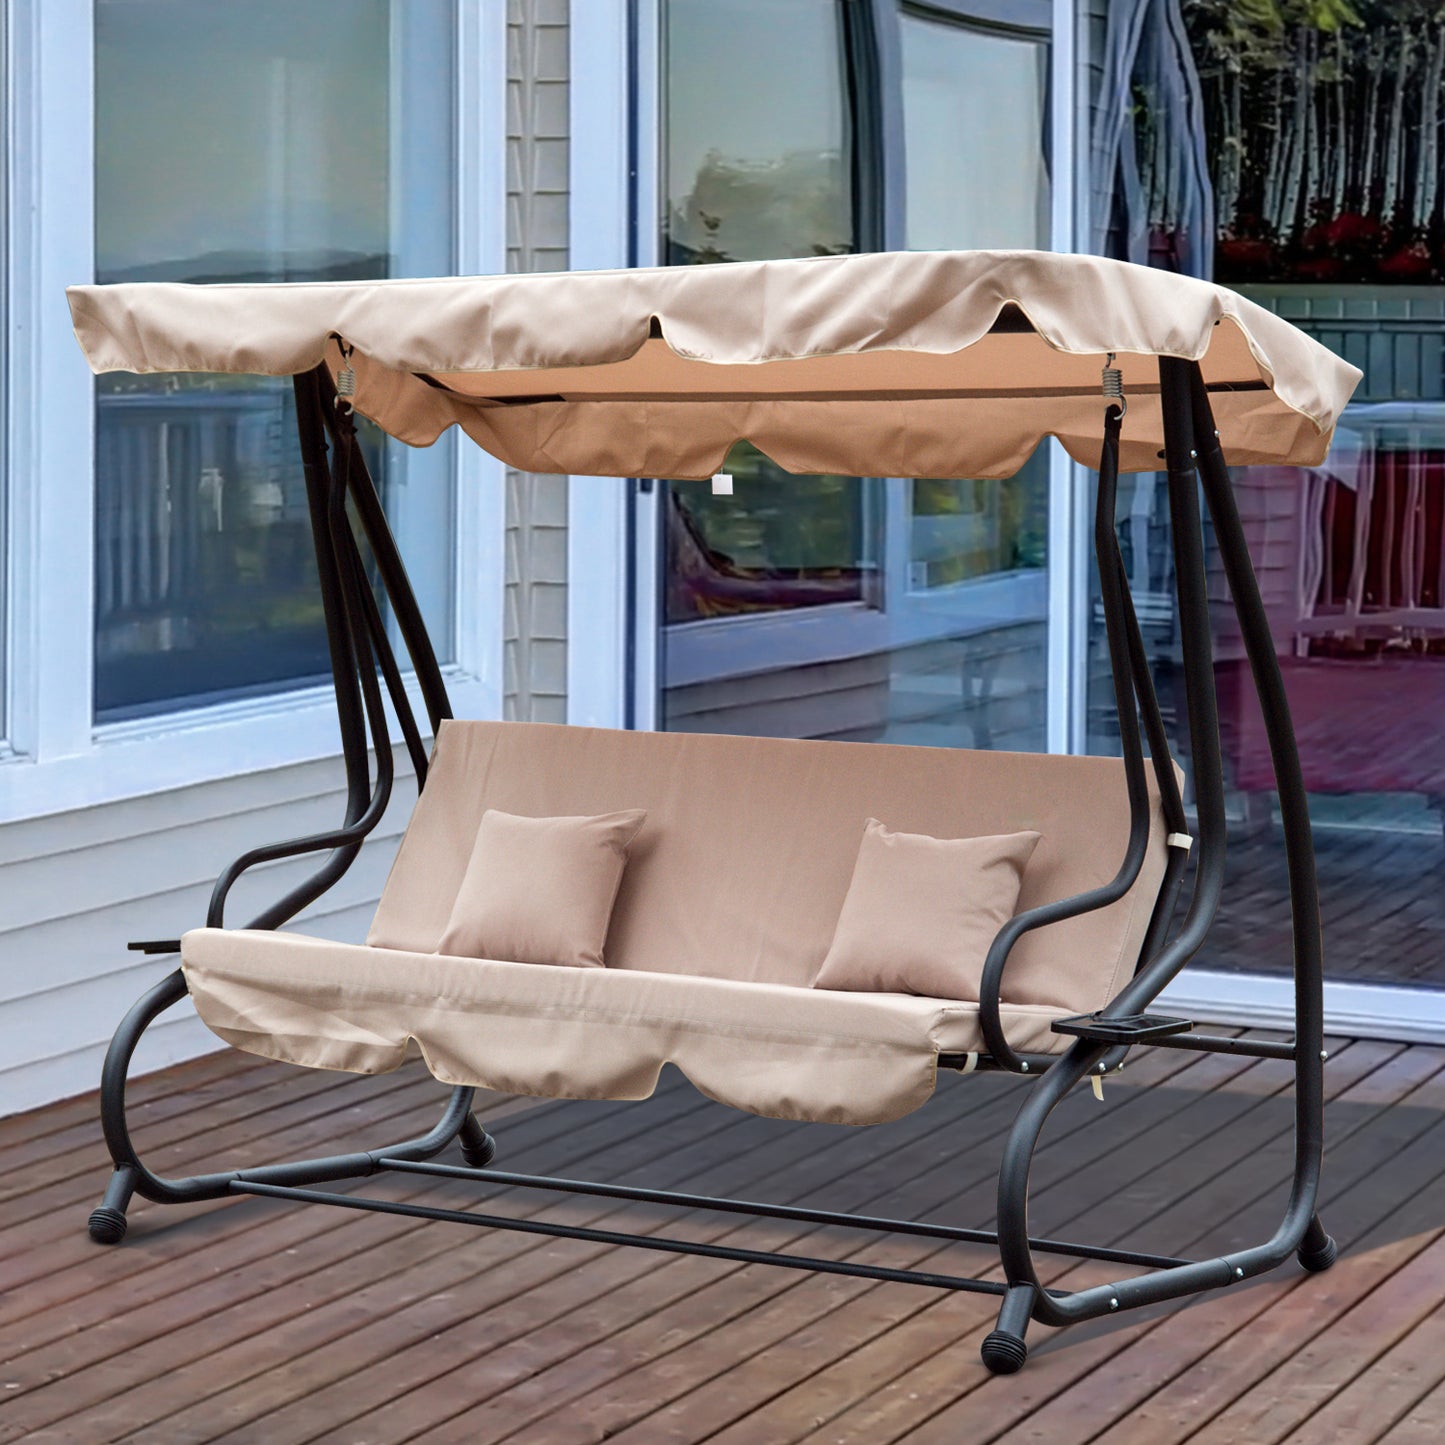 Outsunny Water Resistant Fabric 3-Seater Swing Chair w/ Cup Holder Beige